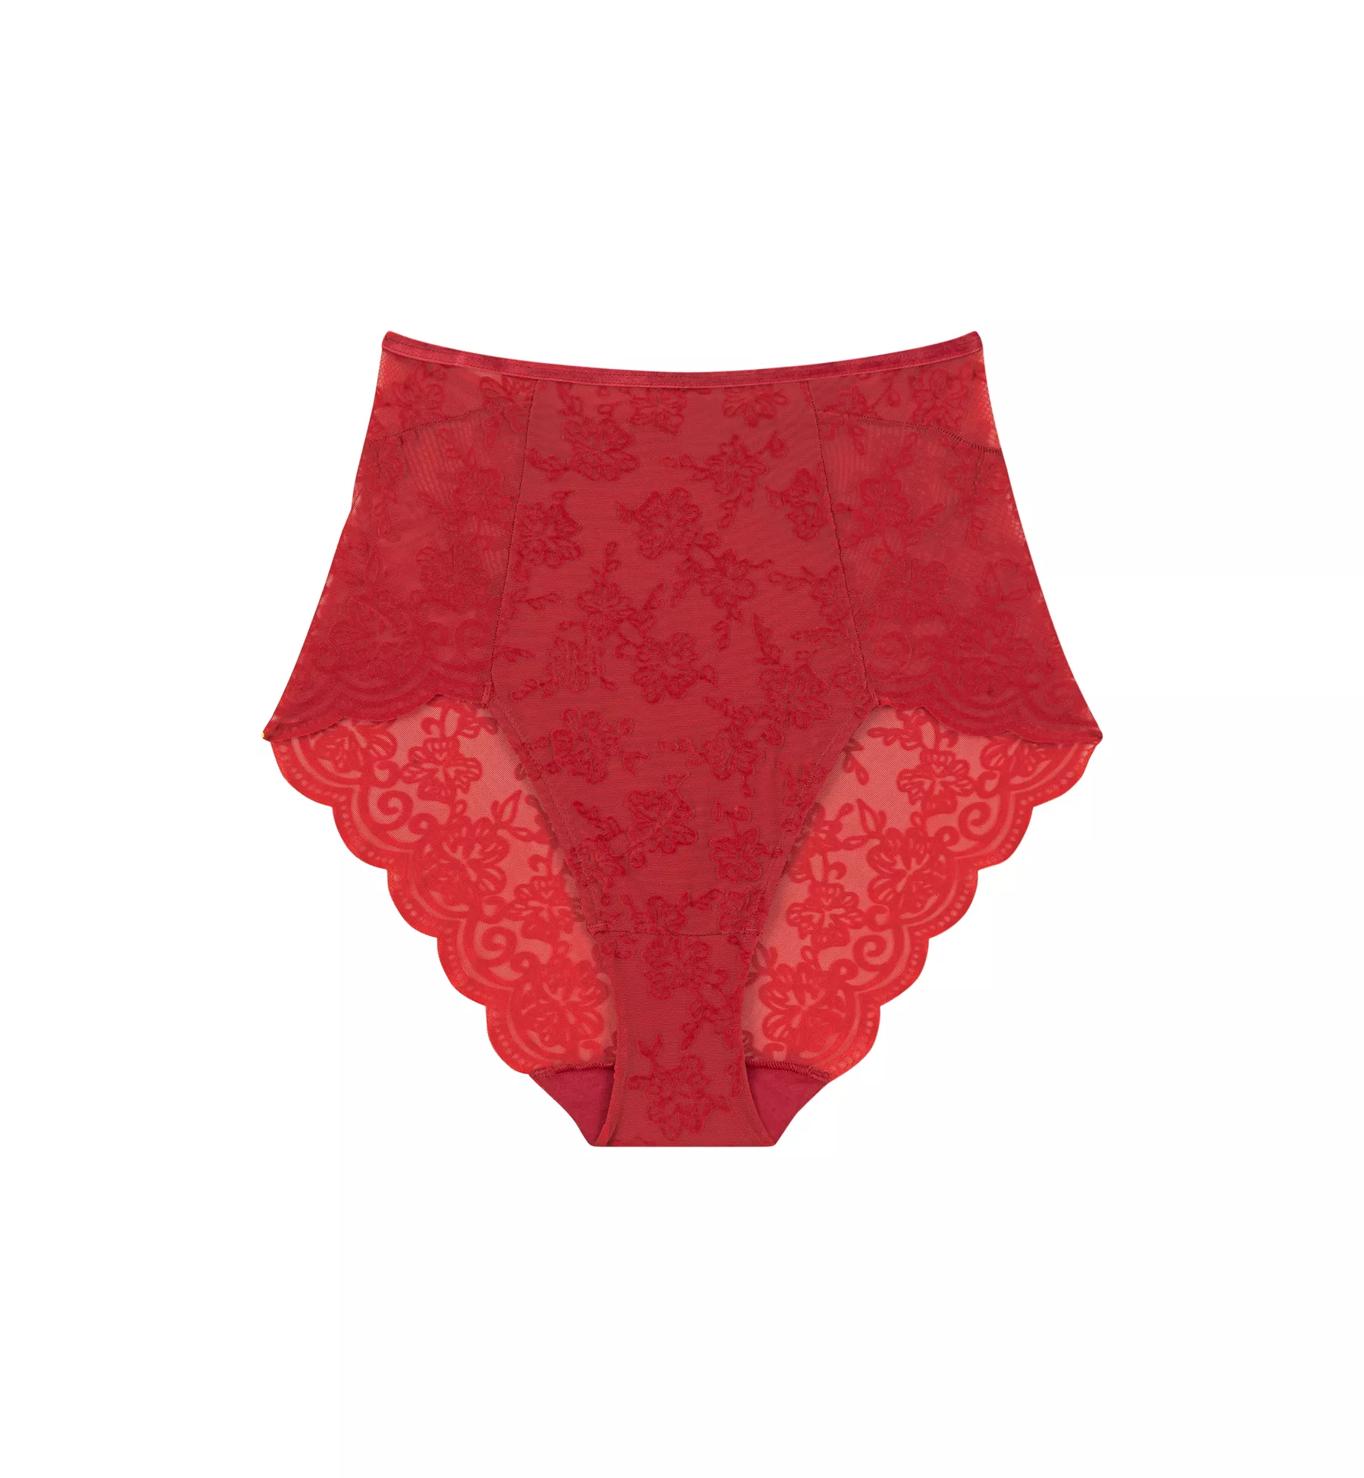 AMOURETTE 300 ROCOCO - Panty hochtailliert